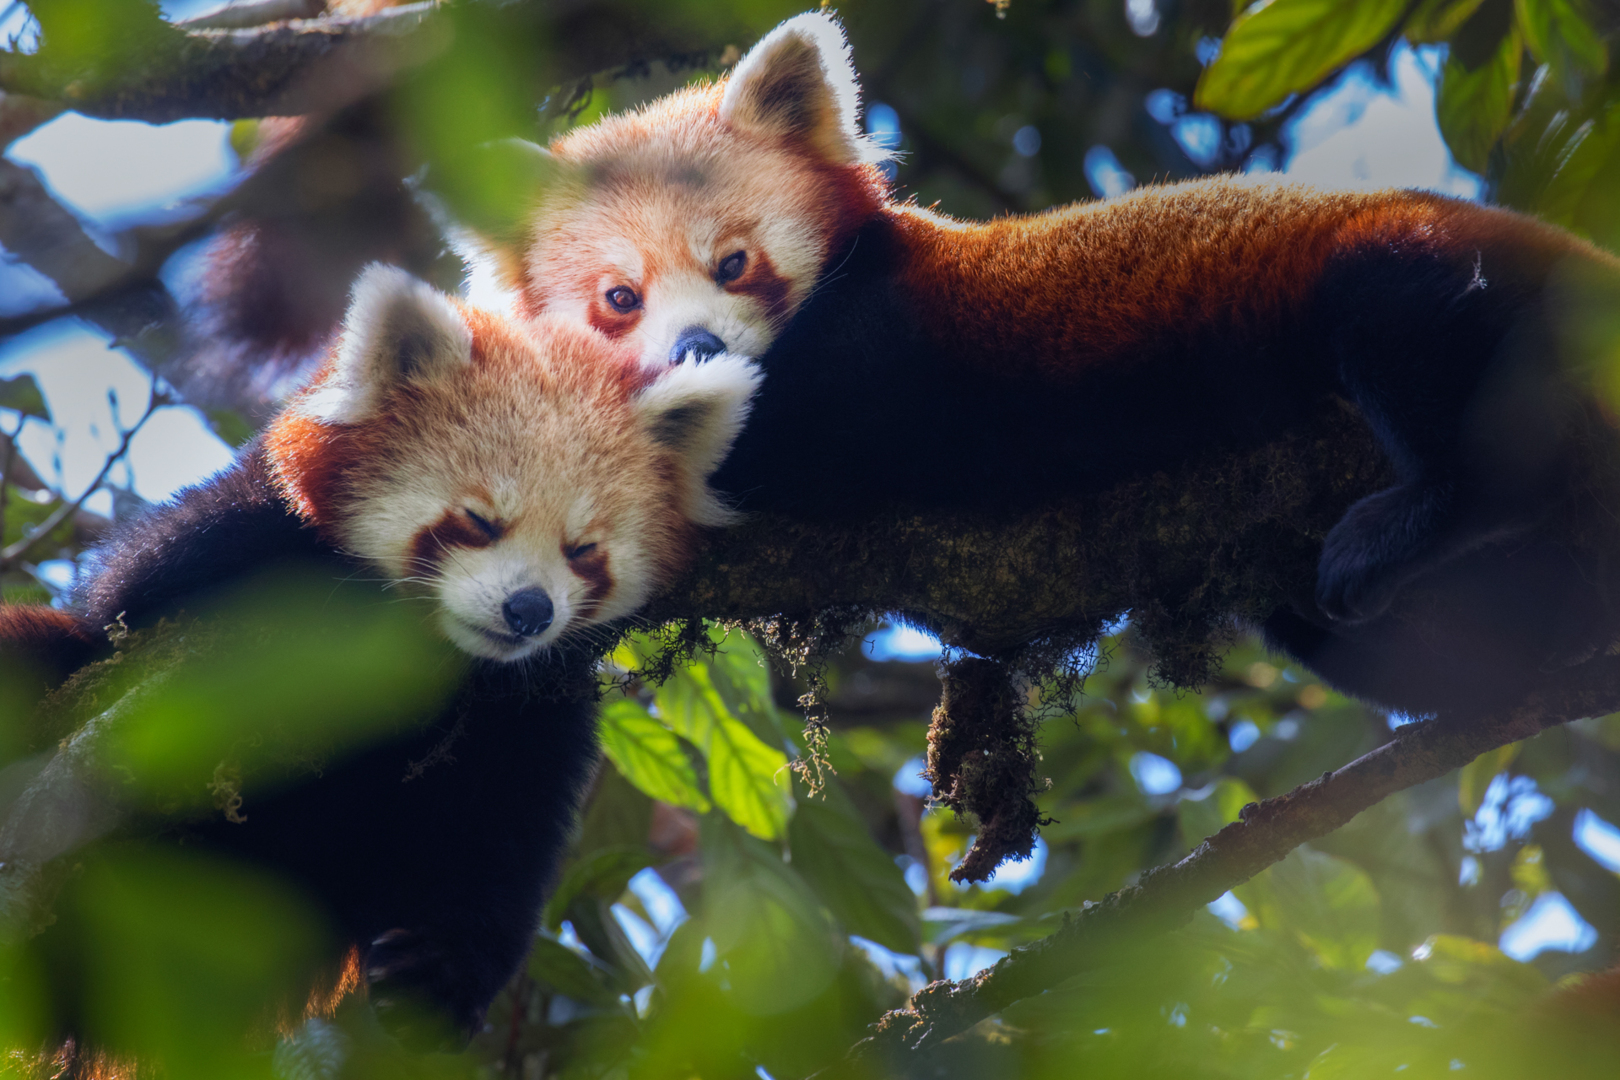 How India is racing against time to save the endangered red panda | Al Jazeera [Video]